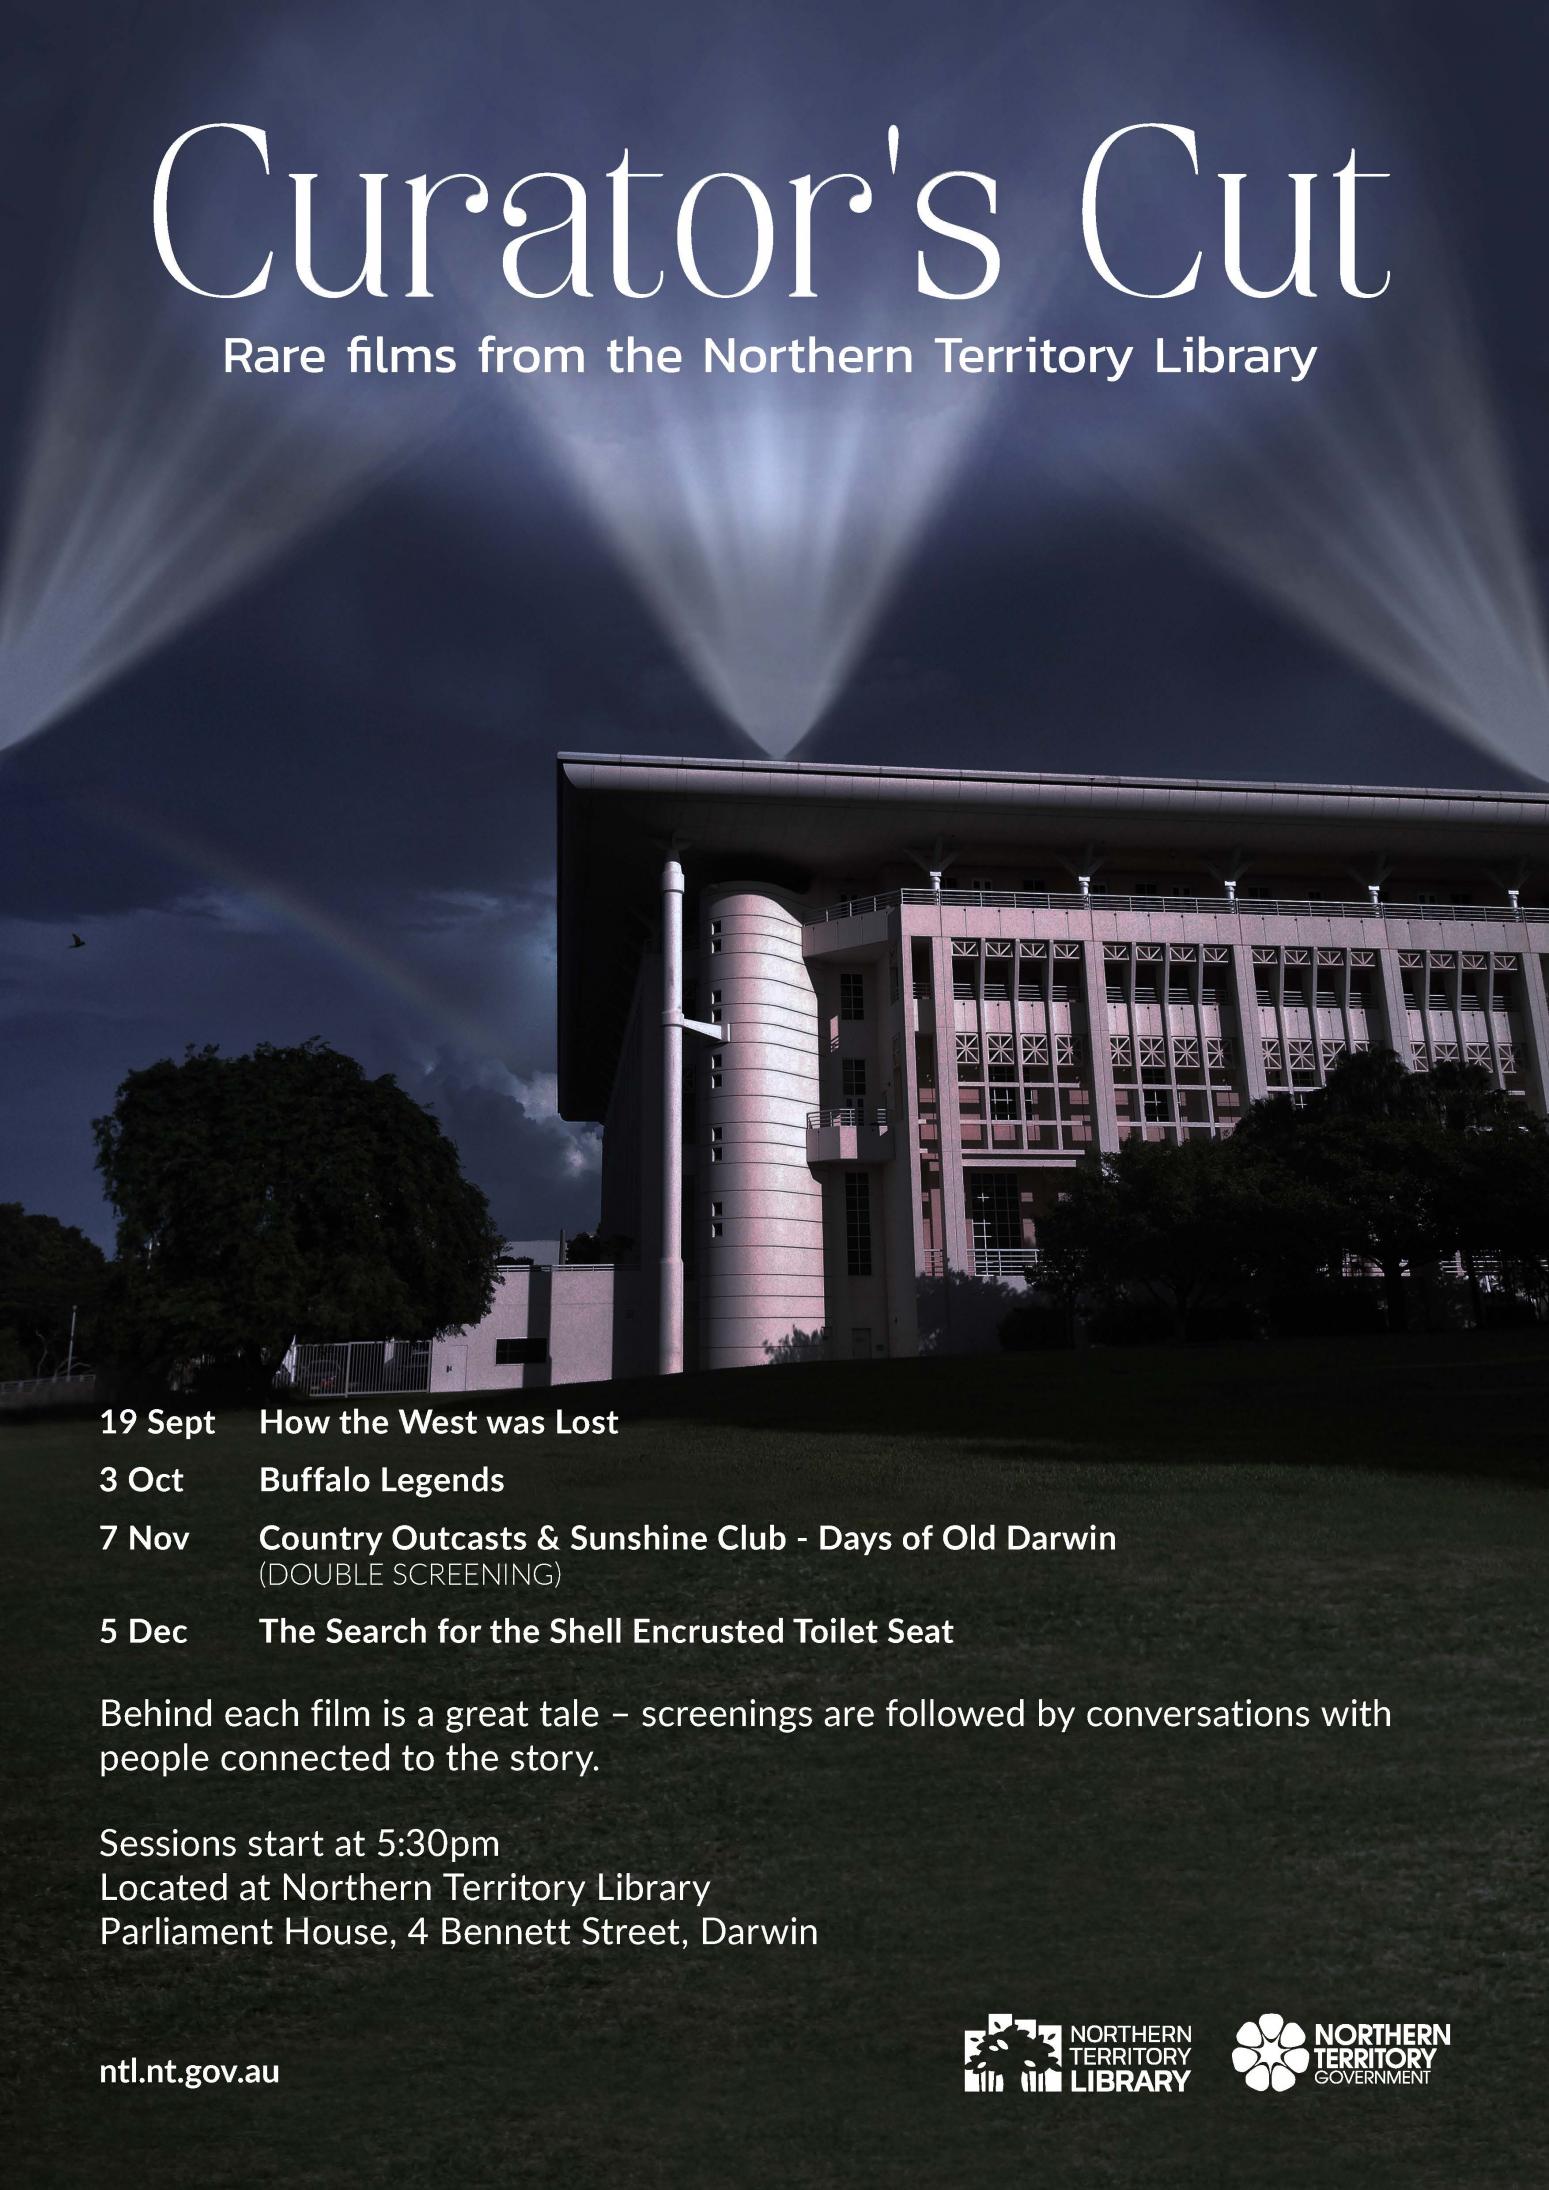 Evening scene of Northern Territory Parliament House with Hollywood style search lights coming out from behind the building. Text on image detailing films to be screened as part of the series. 